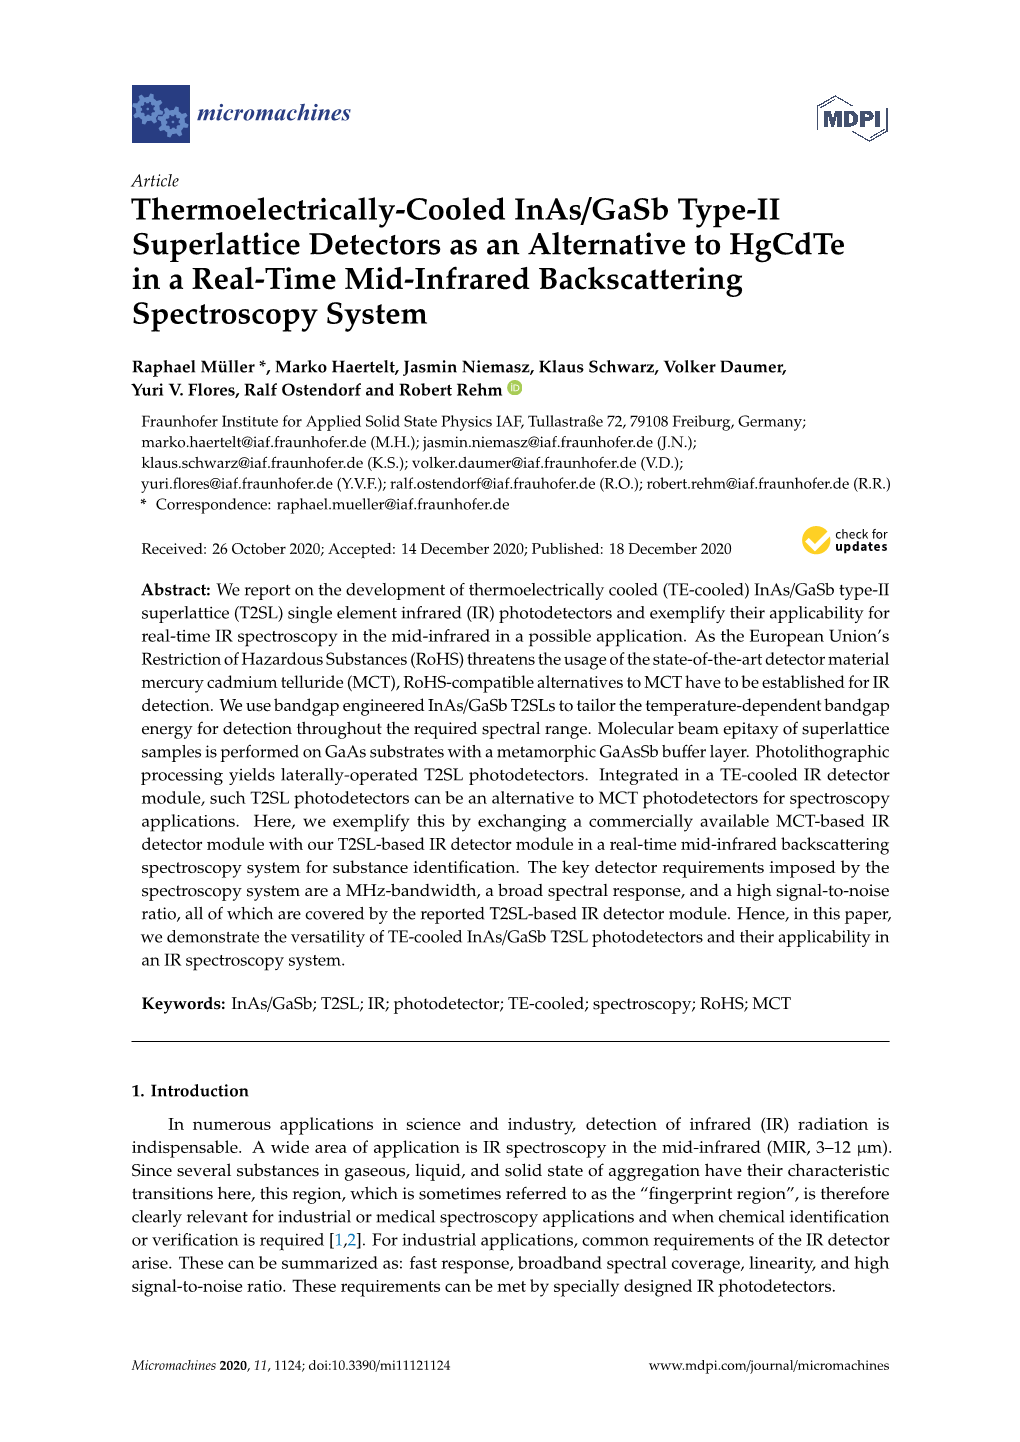 Thermoelectrically-Cooled Inas/Gasb Type-II Superlattice Detectors As an Alternative to Hgcdte in a Real-Time Mid-Infrared Backscattering Spectroscopy System